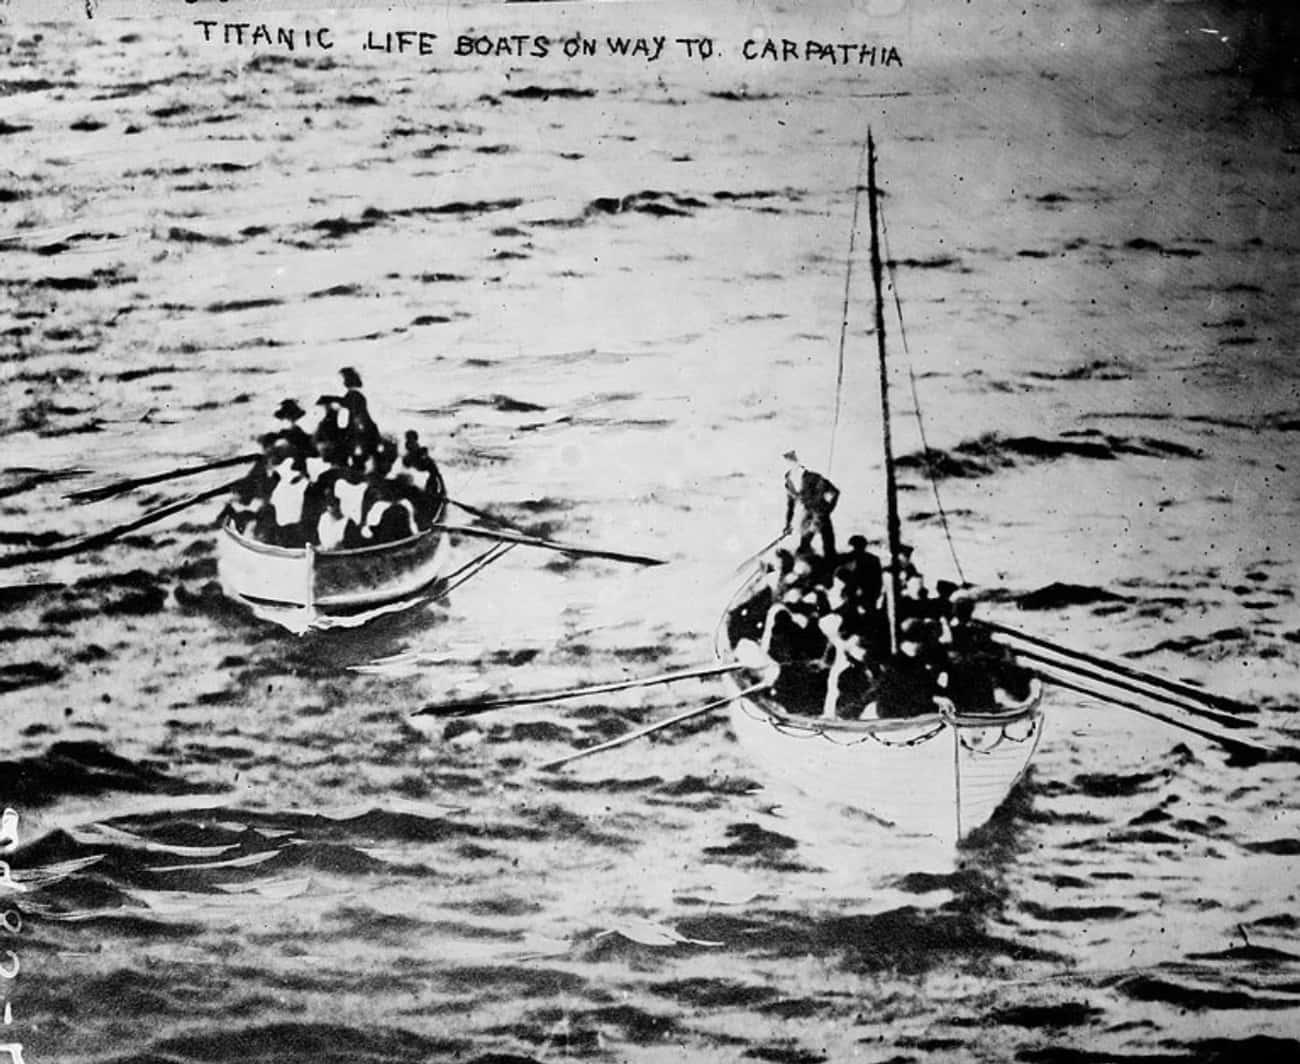 Survivors On Life Boats Headed To The RMS 'Carpathia'